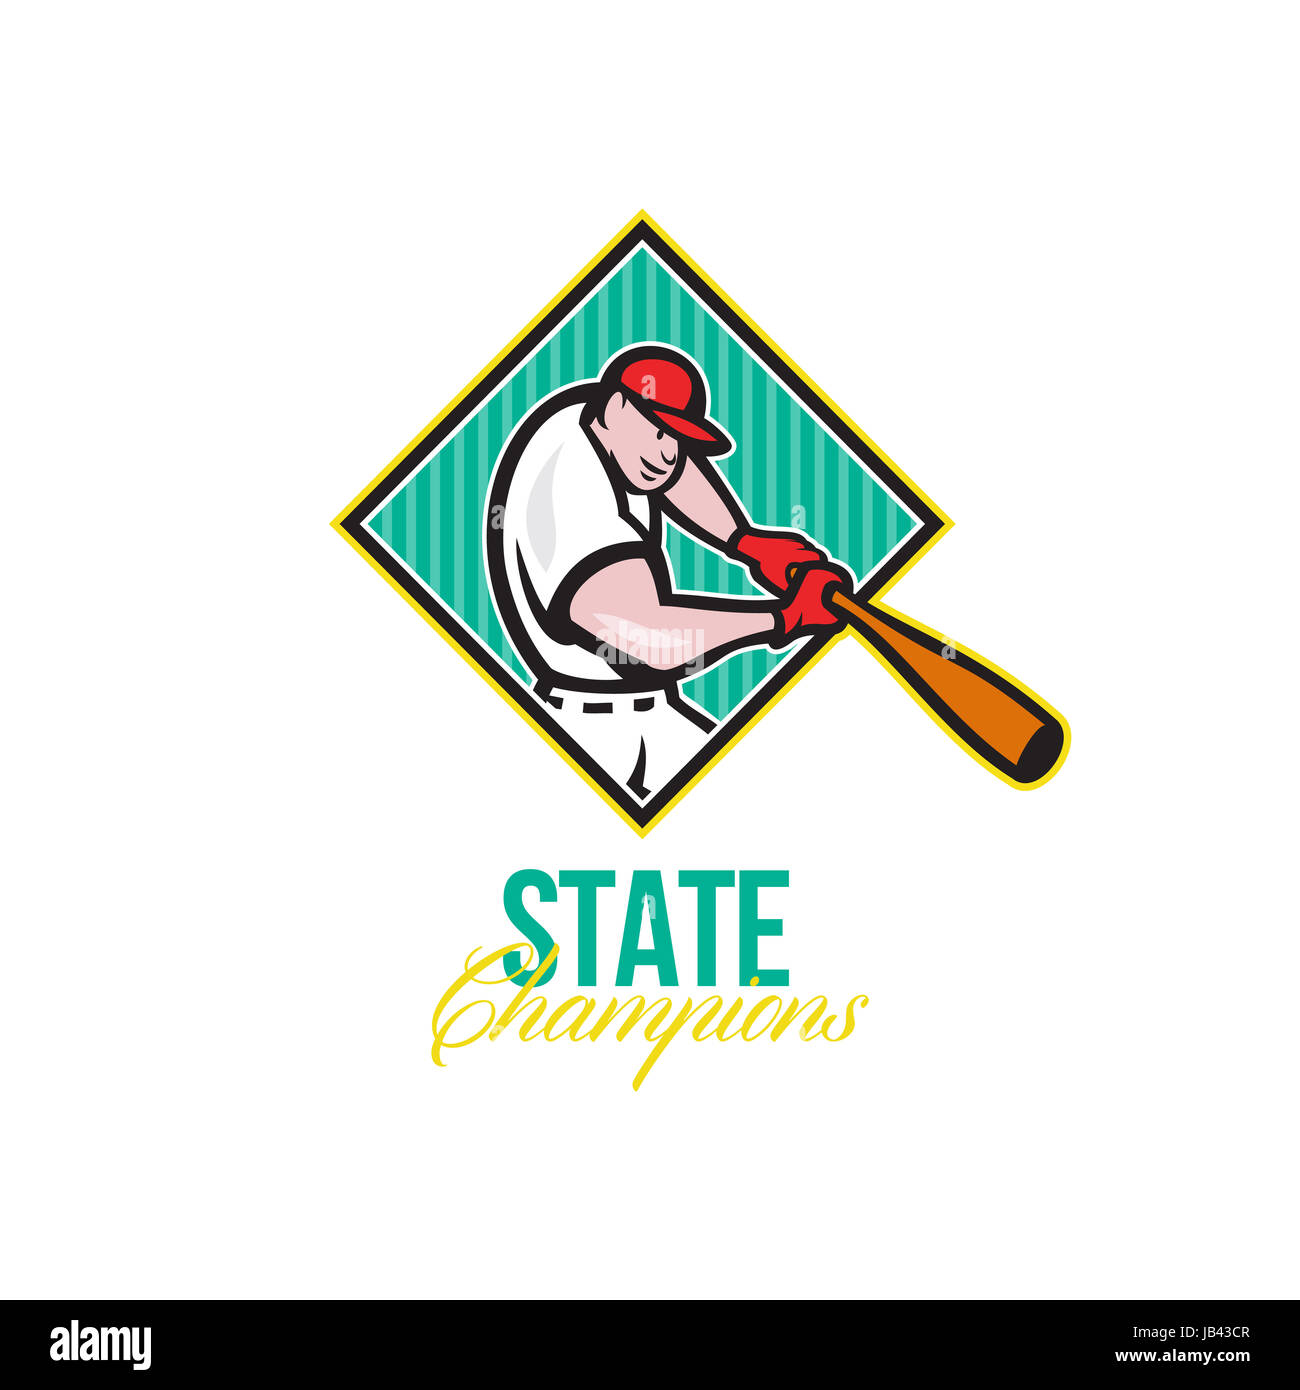 Illustration of a american baseball player batter hitter batting with bat inside diamond shape done in cartoon style with words State Champions. Stock Photo